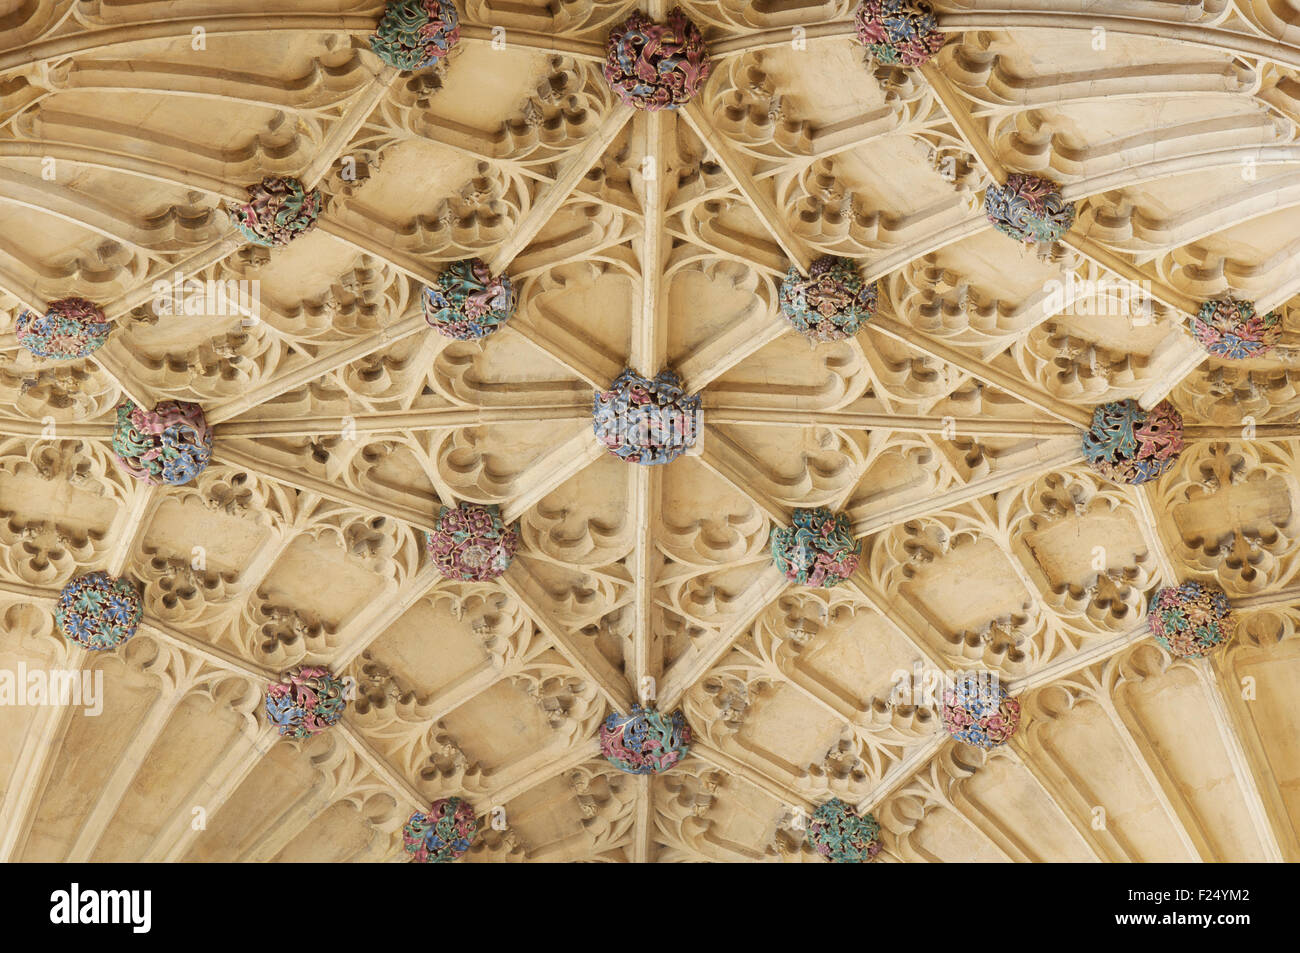 A detail of the colourful bosses of the ornate Gothic fan vaulted ceiling above the organ loft, Sherborne Abbey. Dorset, England, United Kingdom. Stock Photo